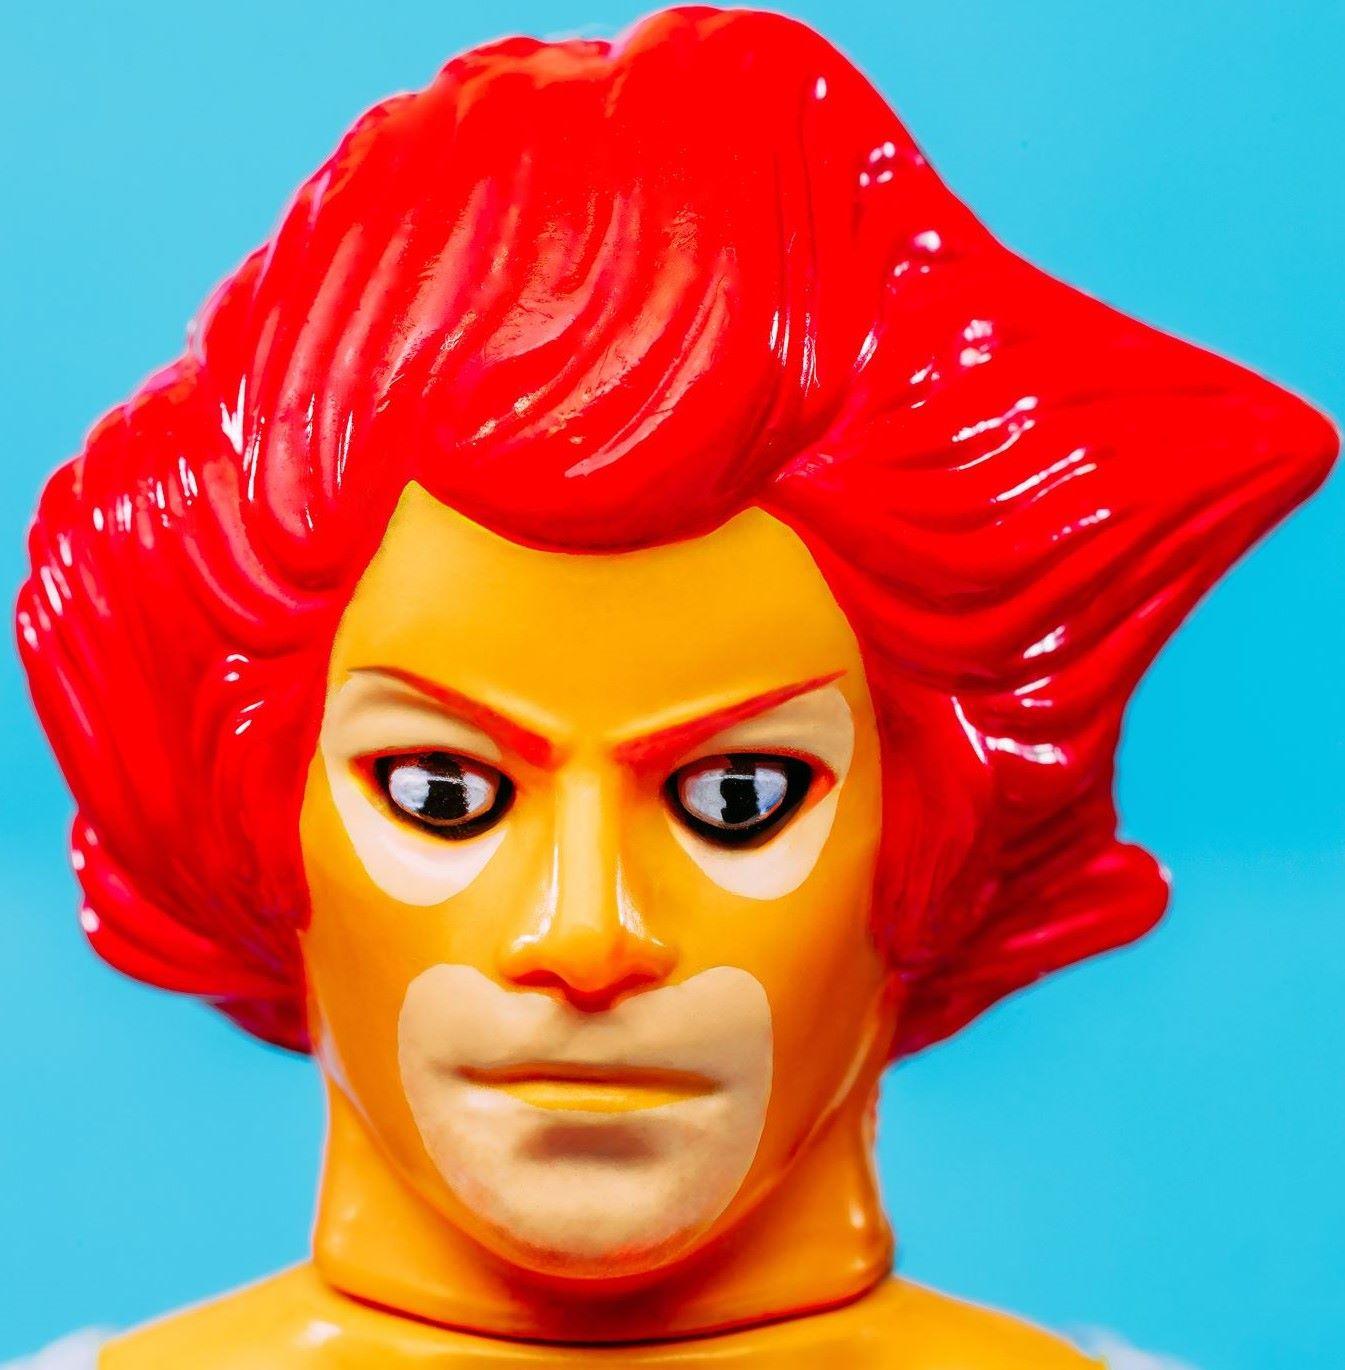 Plastic Head: Vintage LION-O Action Figure - 1985
As a kid, I never watched this show myself, but I do remember my brother having the toy sword of Omens. I have a fond memory of that. I absolutely love the high-octane opening of the show, with its